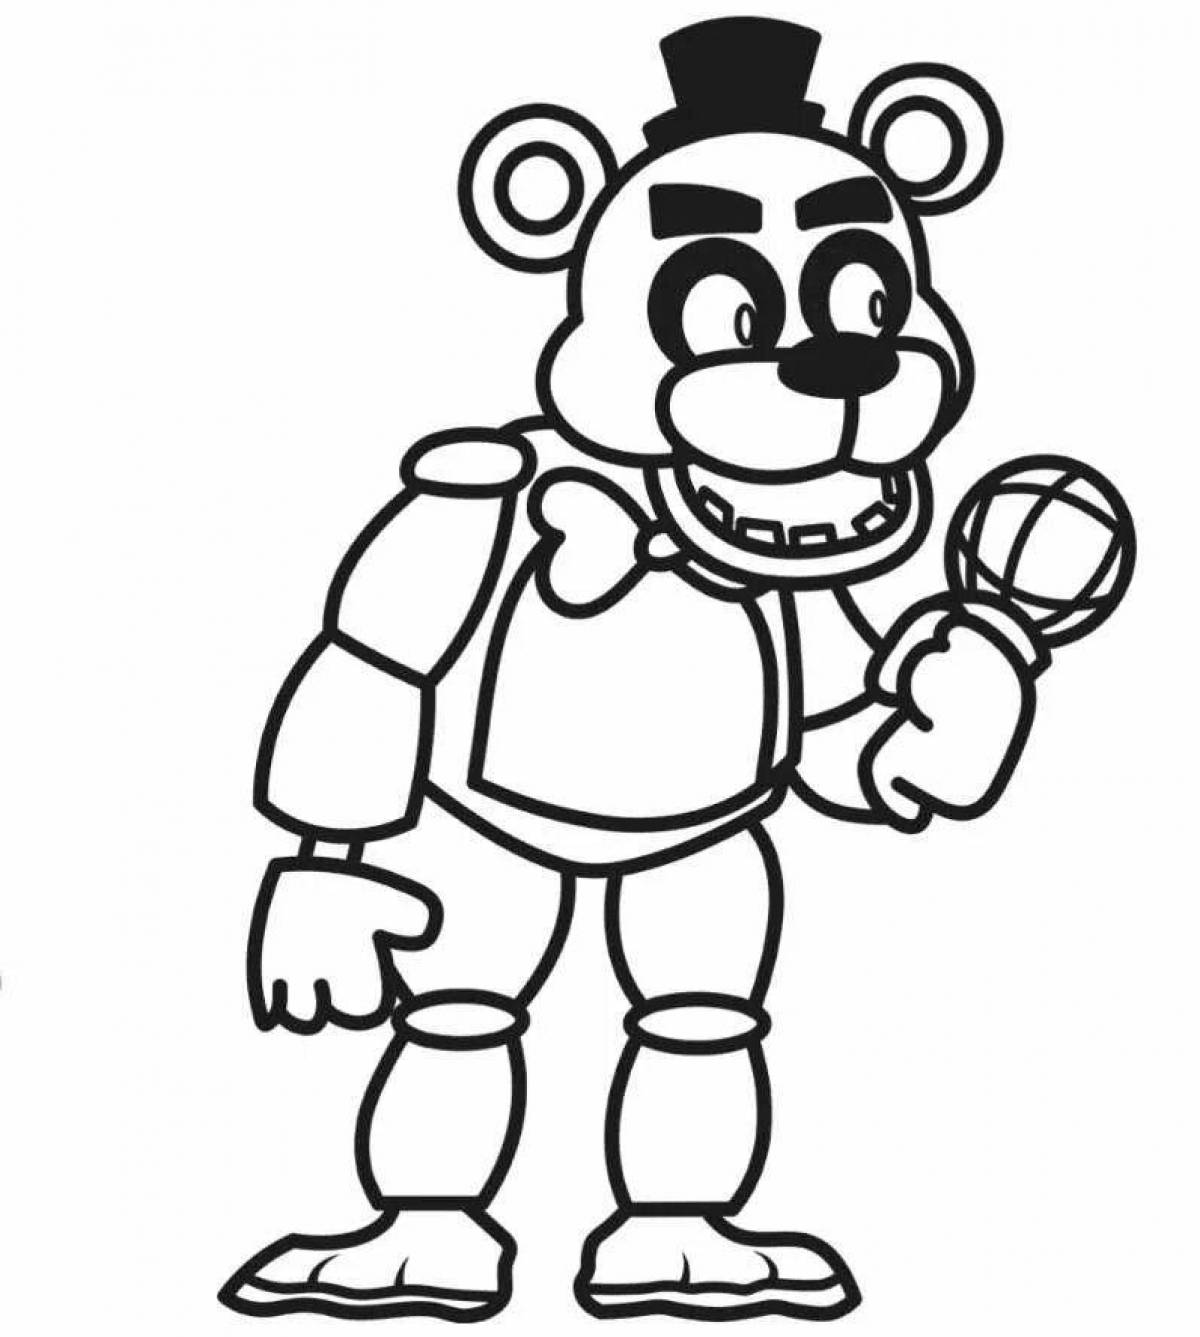 Fnaf 9 moon amazing coloring pages